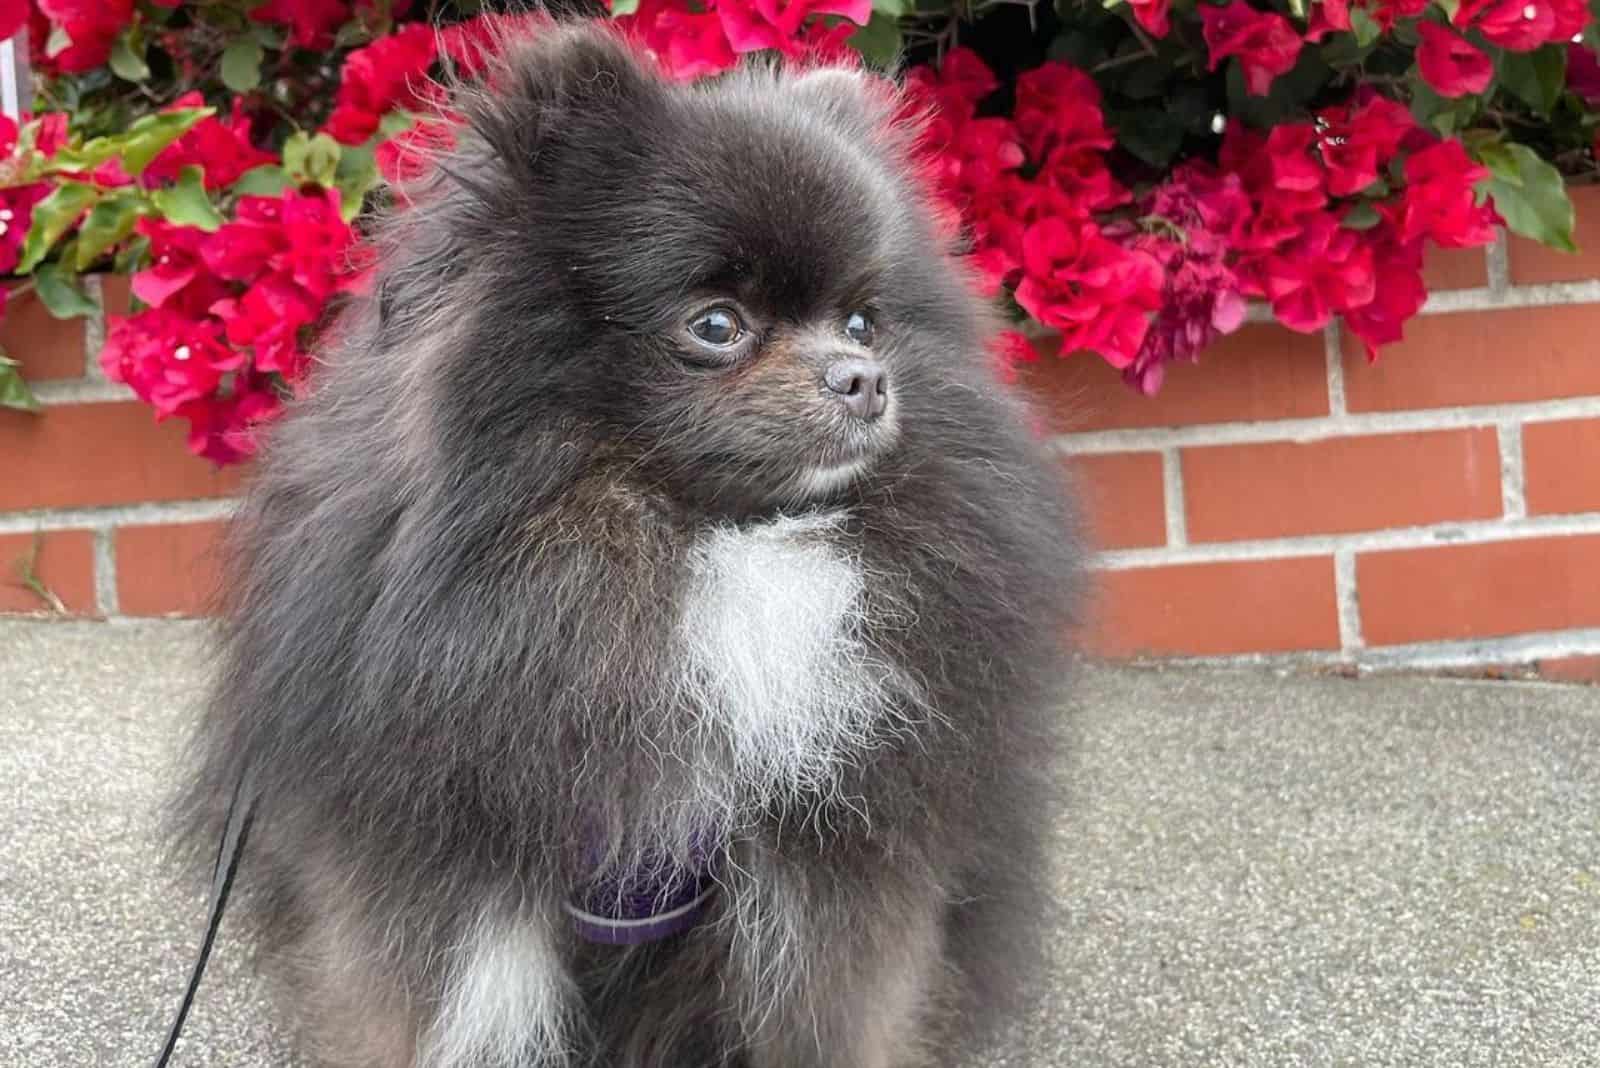 A Blue Pomeranian: What Is The Story Behind This Rare Color?